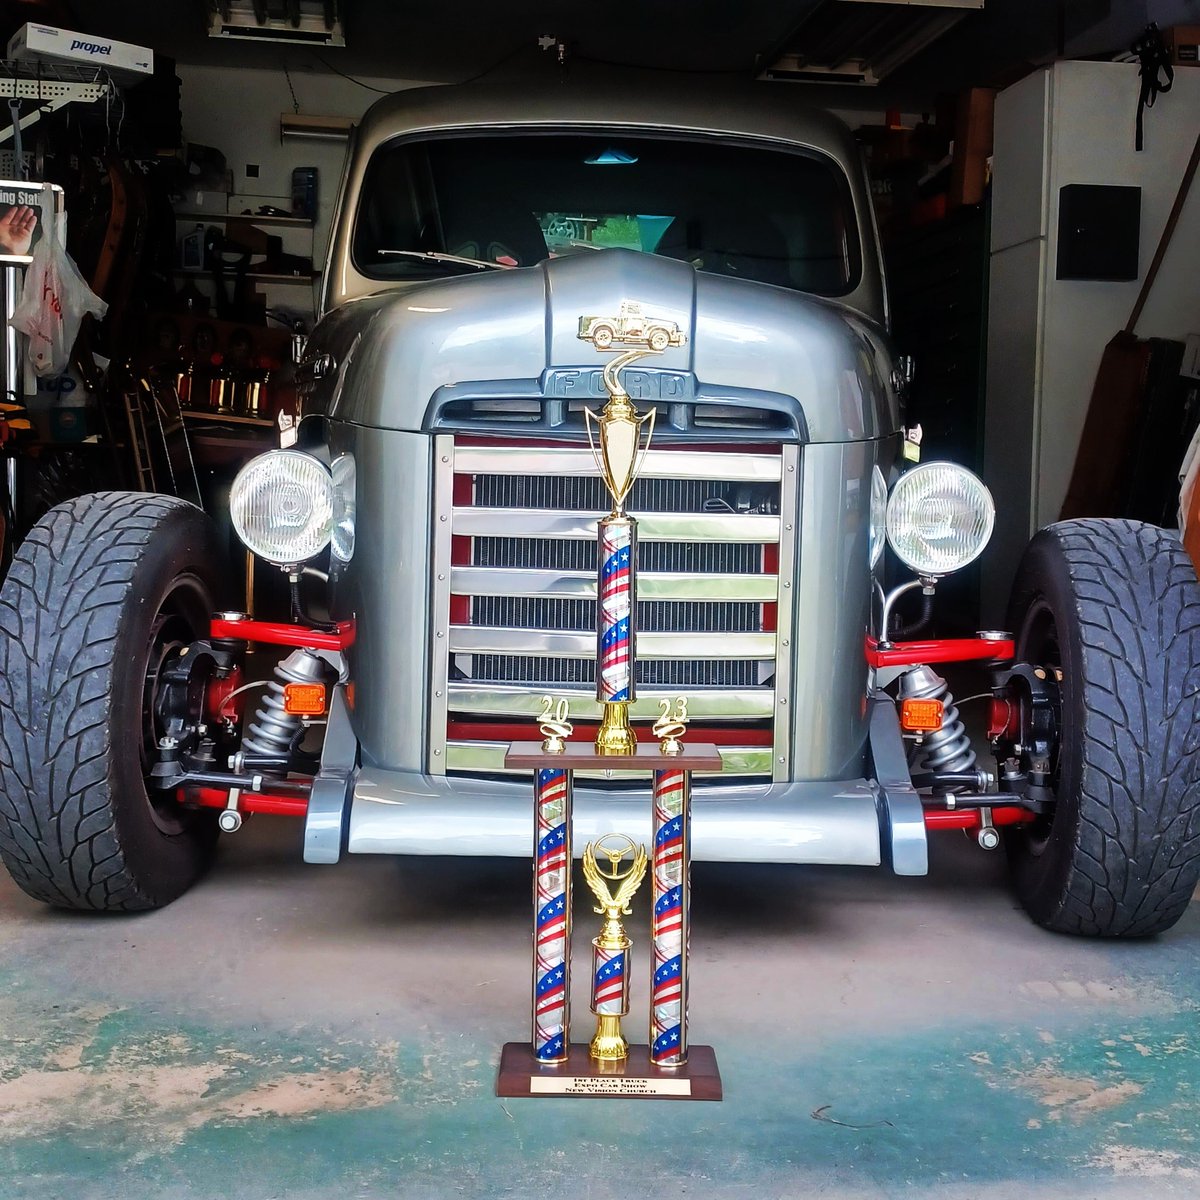 The little Hotrod 51' brought home another trophy 🏆 and was able to outrun the rain an stay dry yesterday #feelinggood #builtnotbought #winning